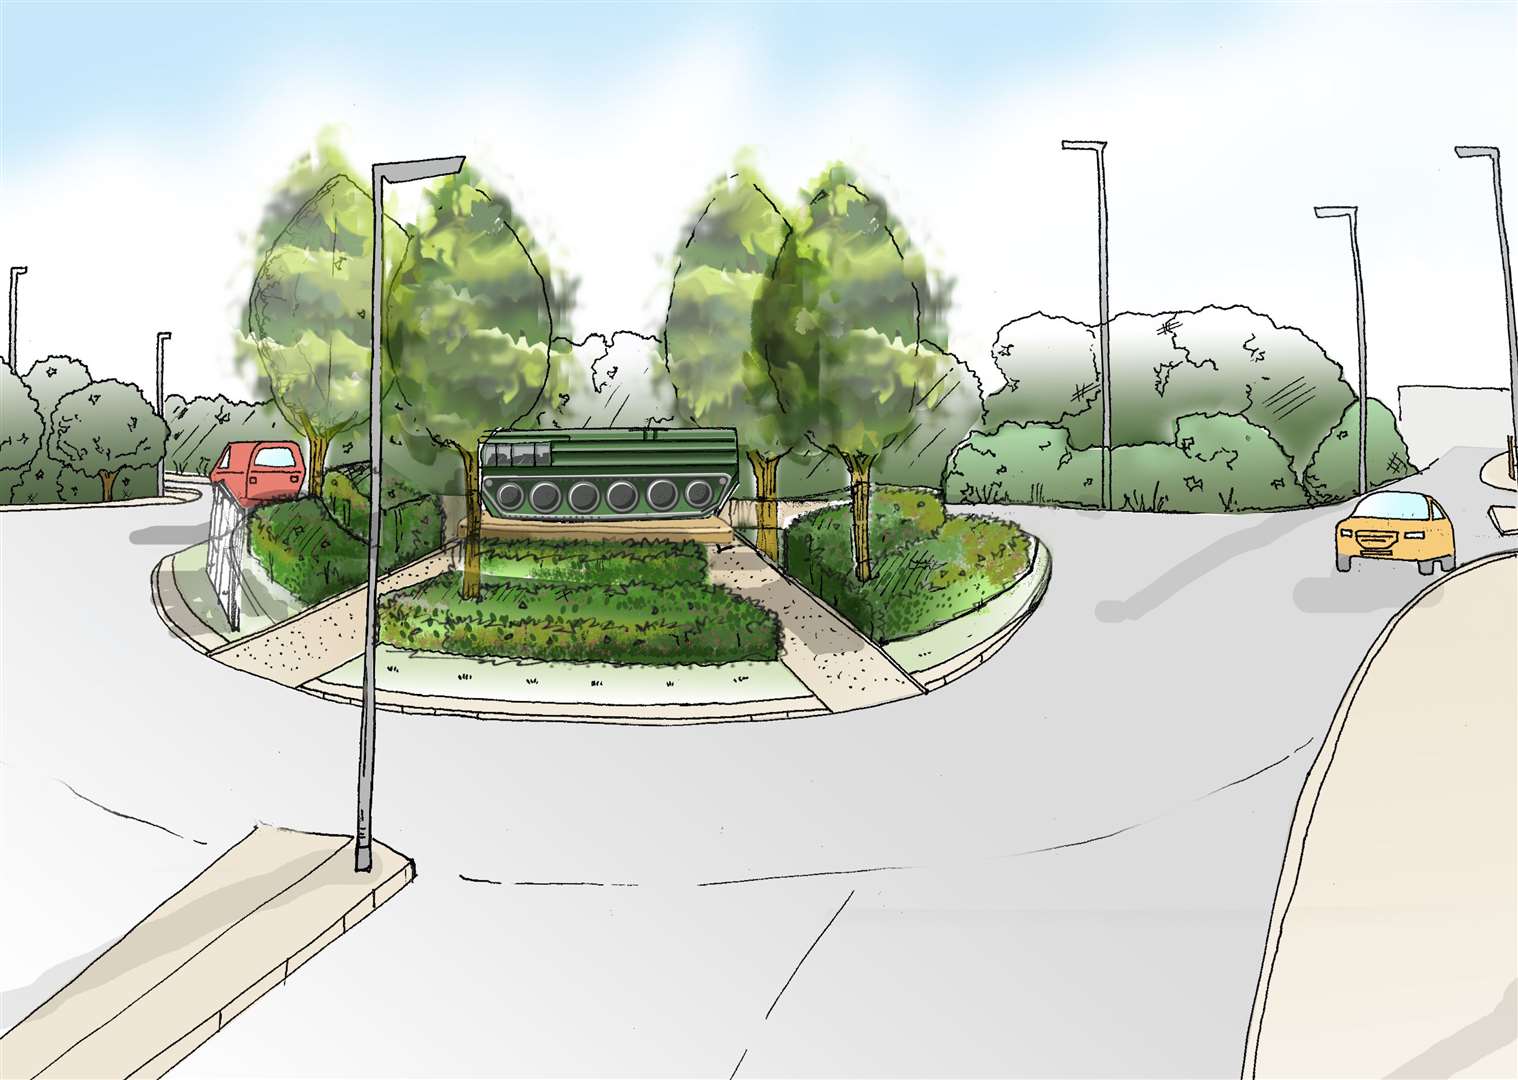 The tank roundabout is due to be improved as part of the dual carriageway works